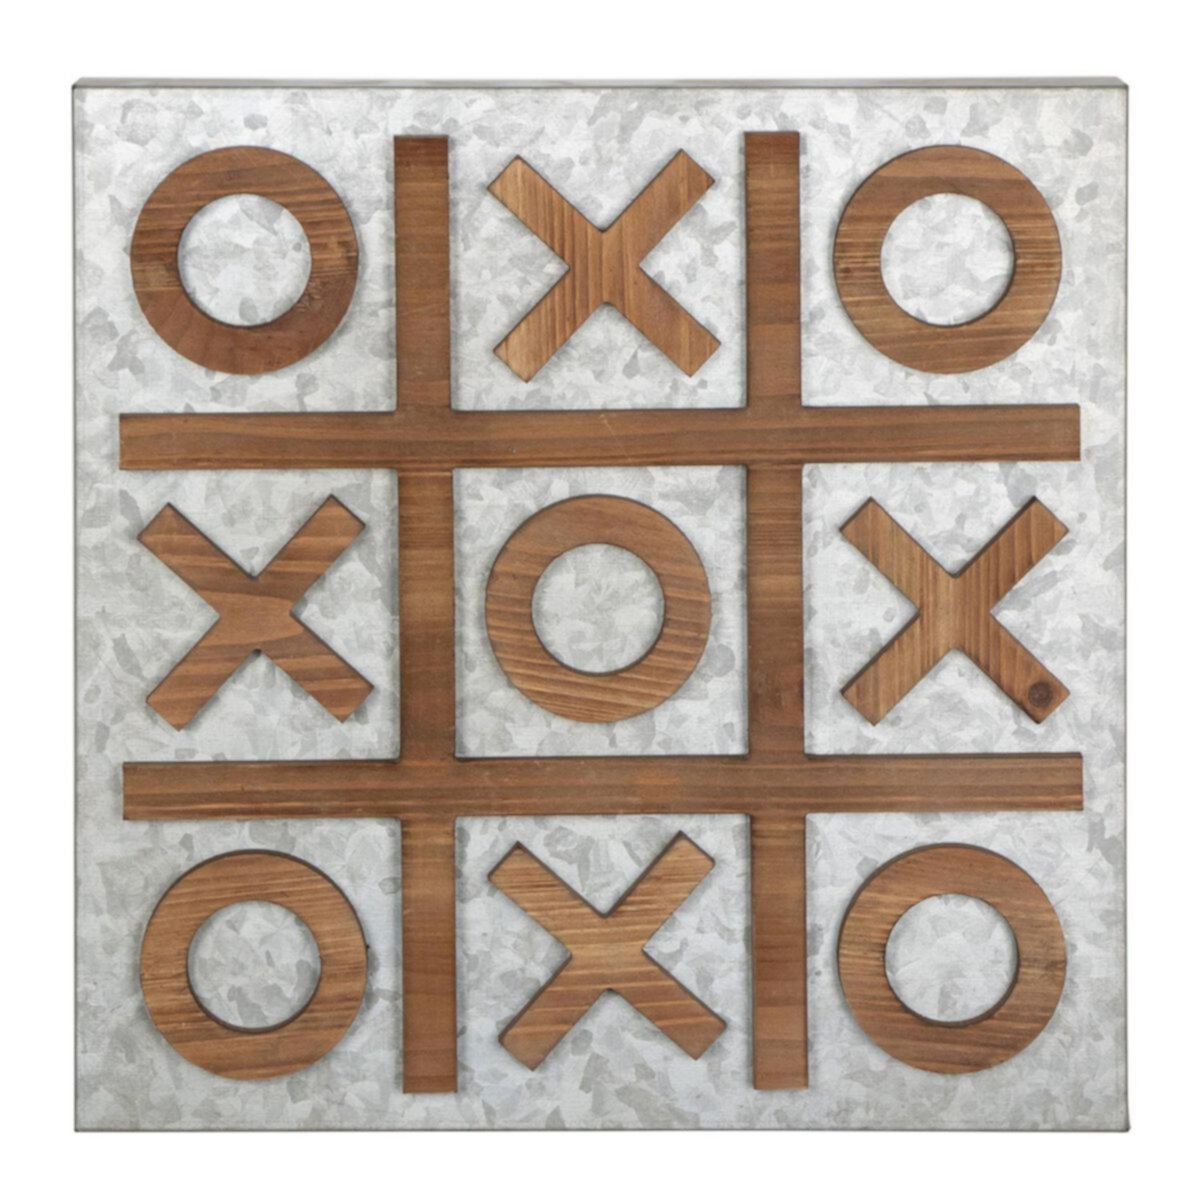 Tic-Tac-Toe Magnetic Wall Art Unbranded